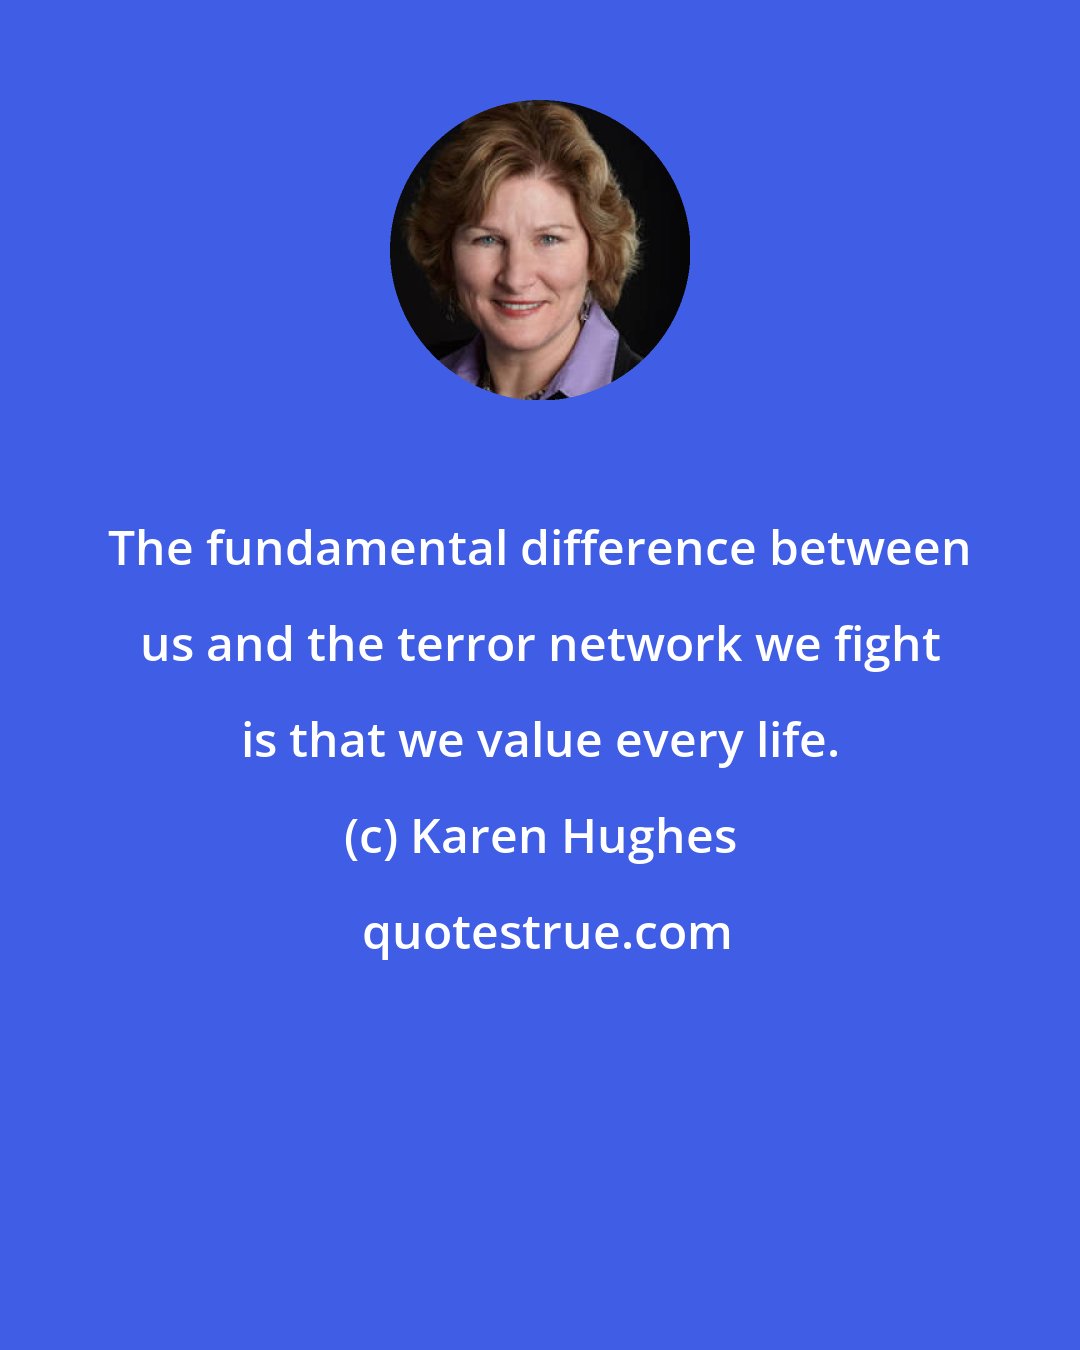 Karen Hughes: The fundamental difference between us and the terror network we fight is that we value every life.